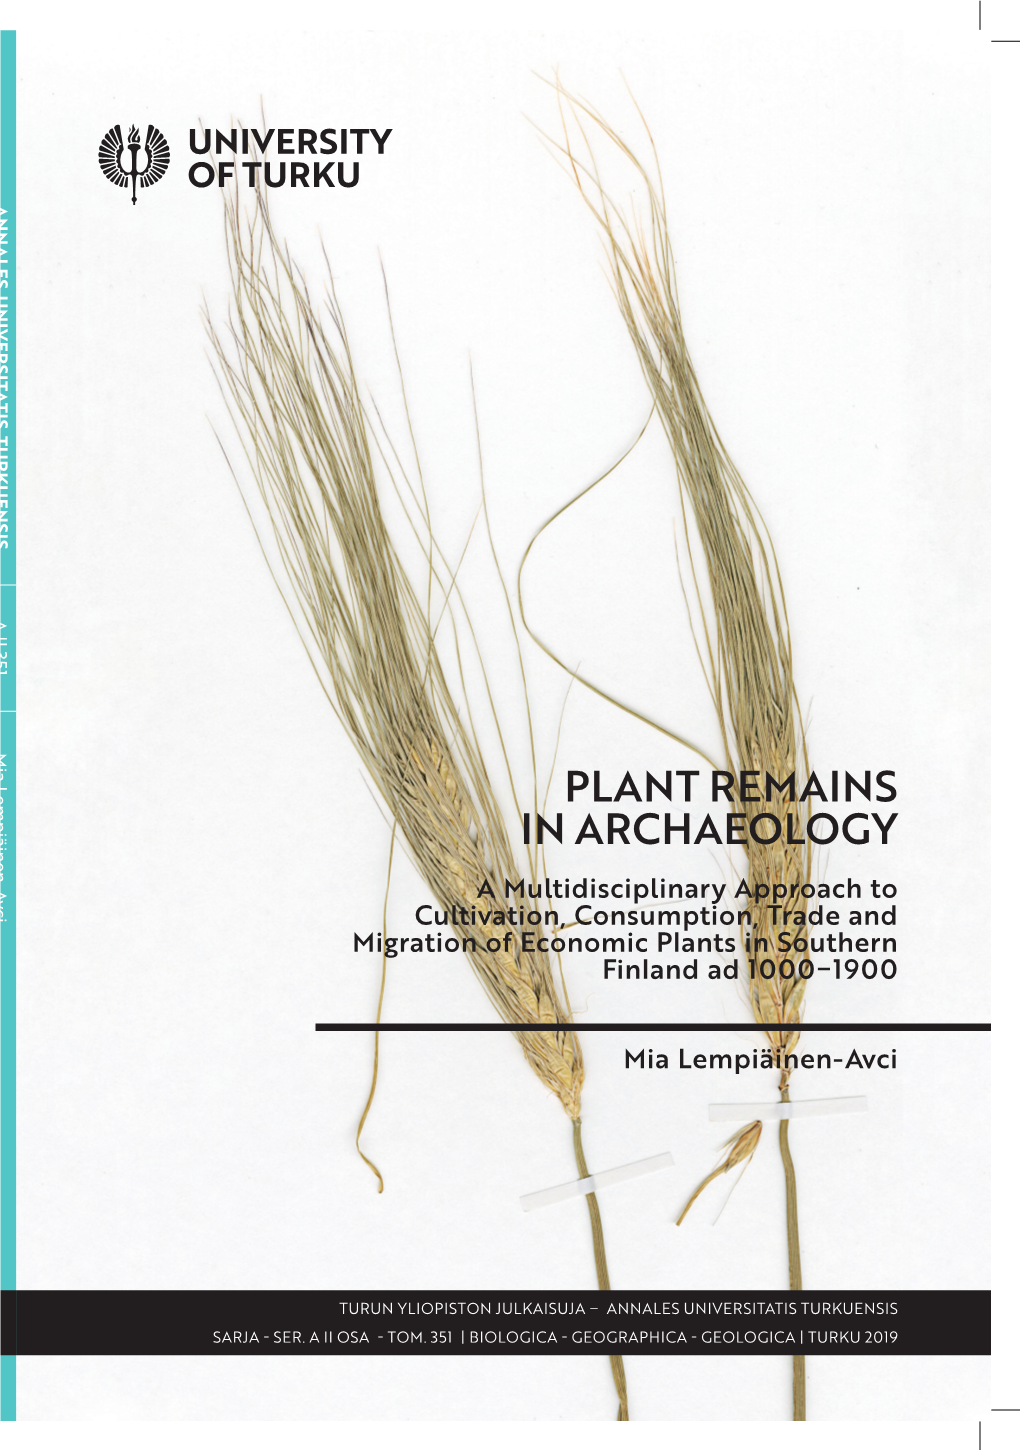 PLANT REMAINS in ARCHAEOLOGY a Multidisciplinary Approach to Cultivation, Consumption, Trade and Migration of Economic Plants in Southern Finland Ad 1000−1900